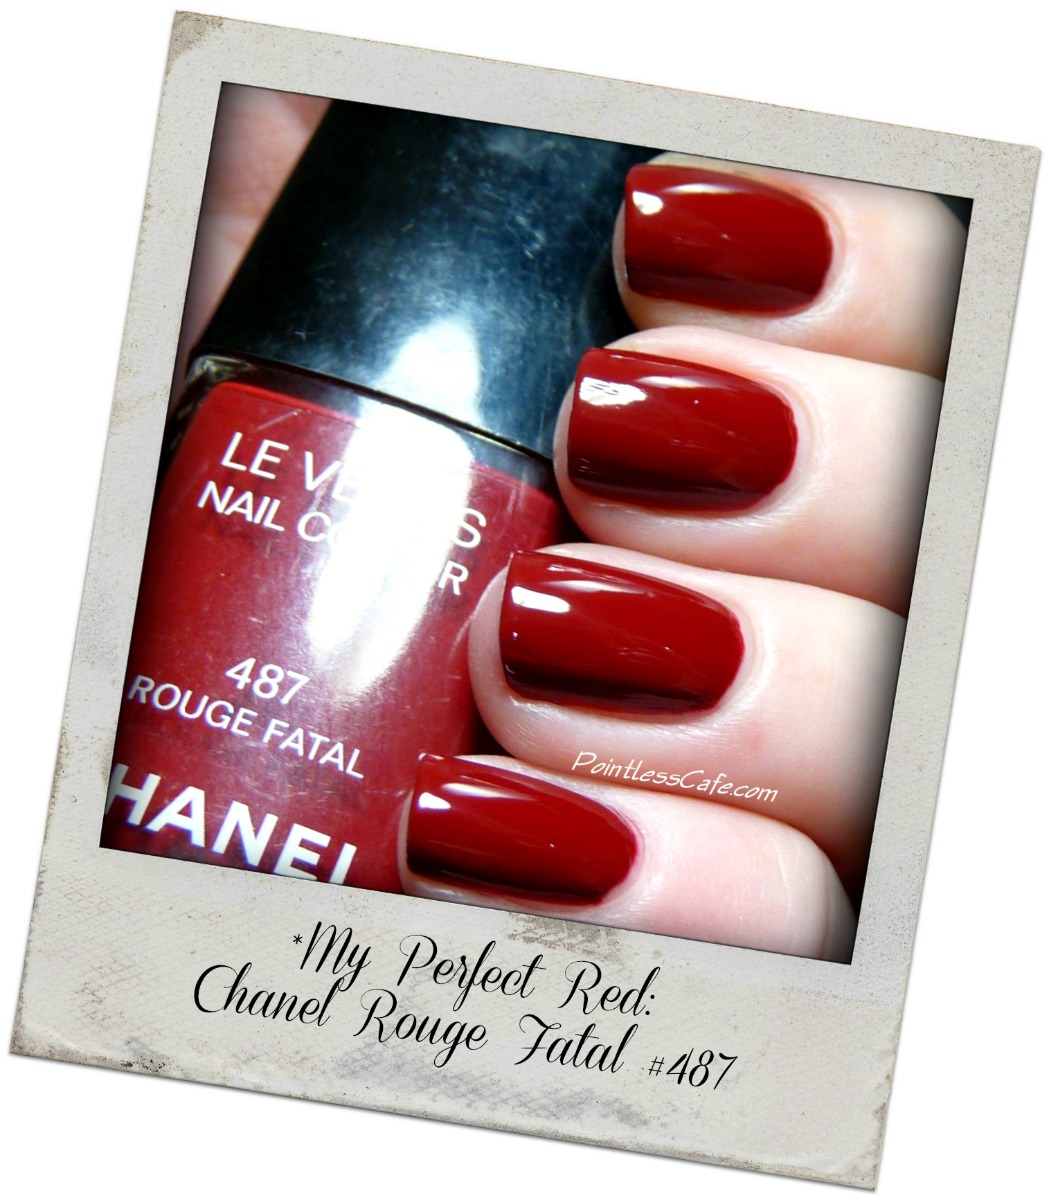 Marias Nail Art and Polish Blog: Chanel Rouge Noir 18 - first released in  1994 and was part of the Vamp Triology collection